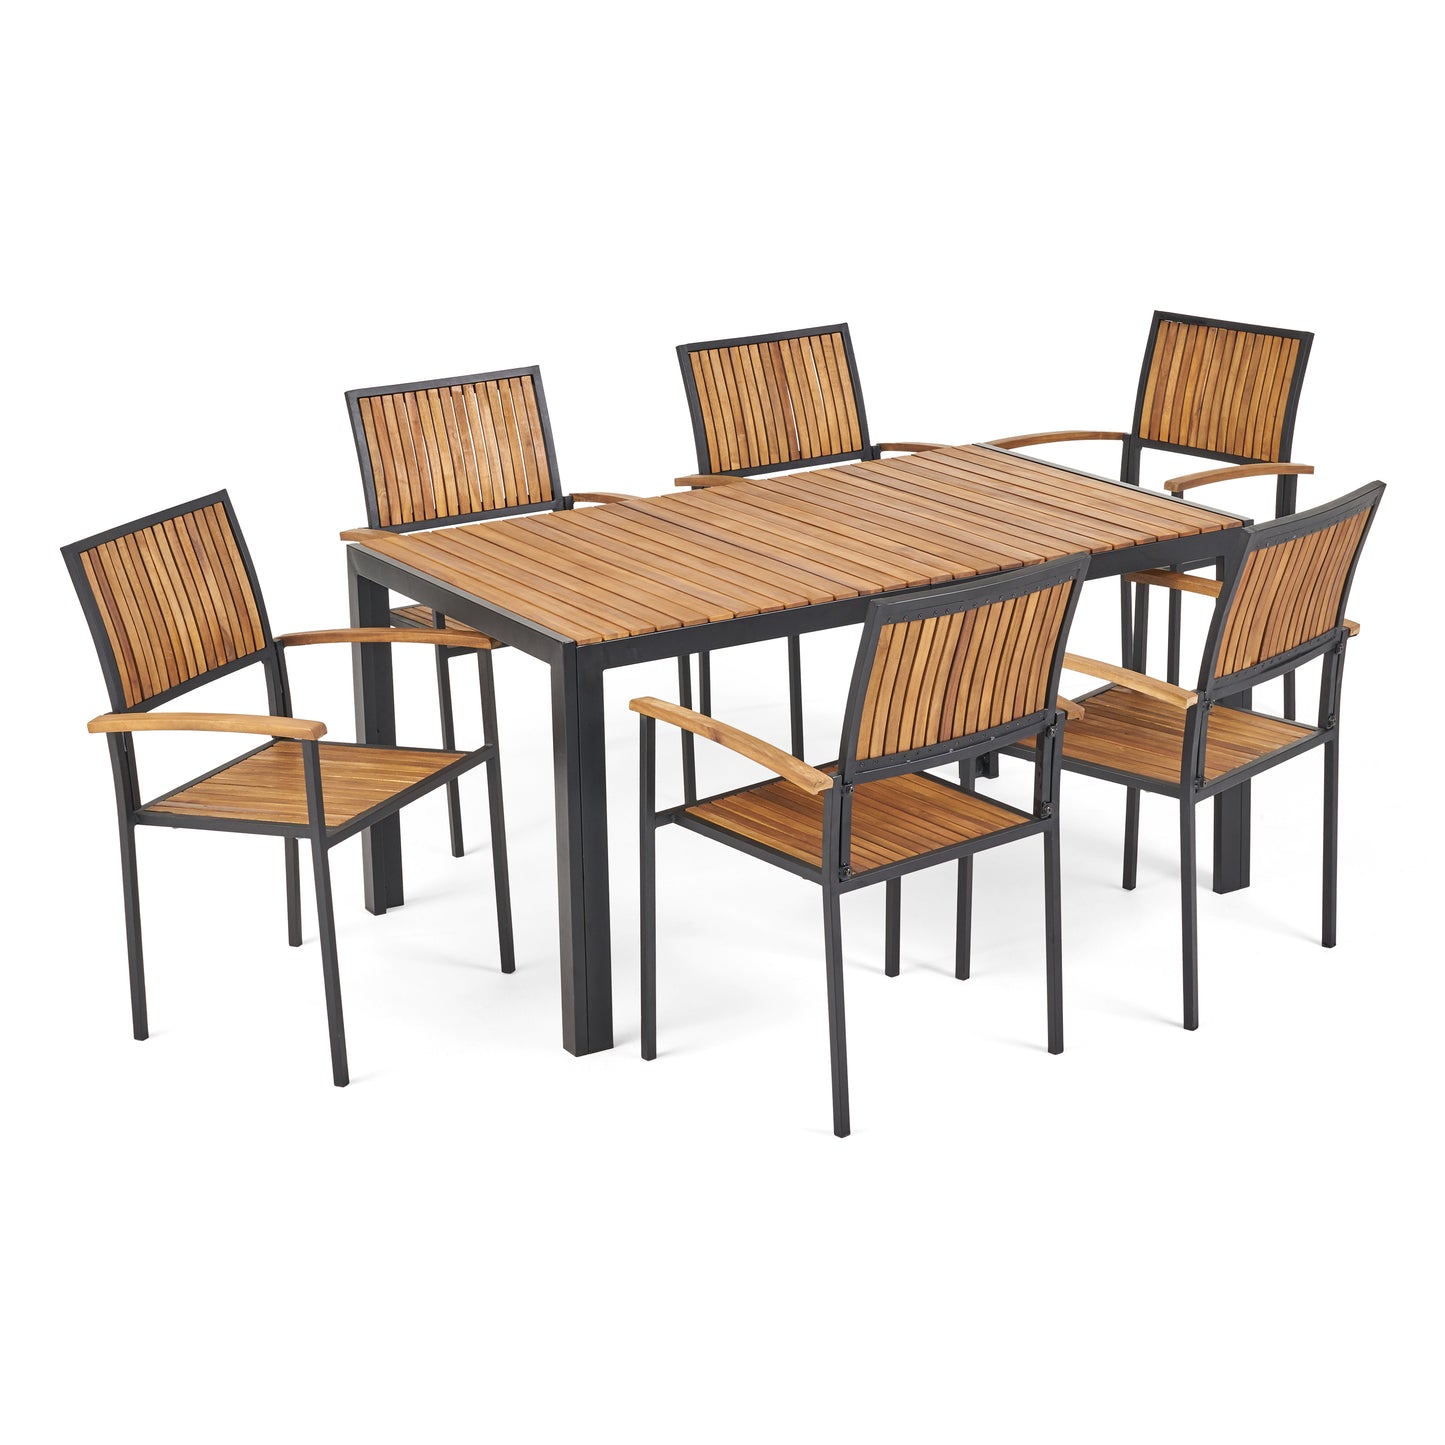 Grace Outdoor 6 Seater Acacia Wood Dining Set with an Iron Frame